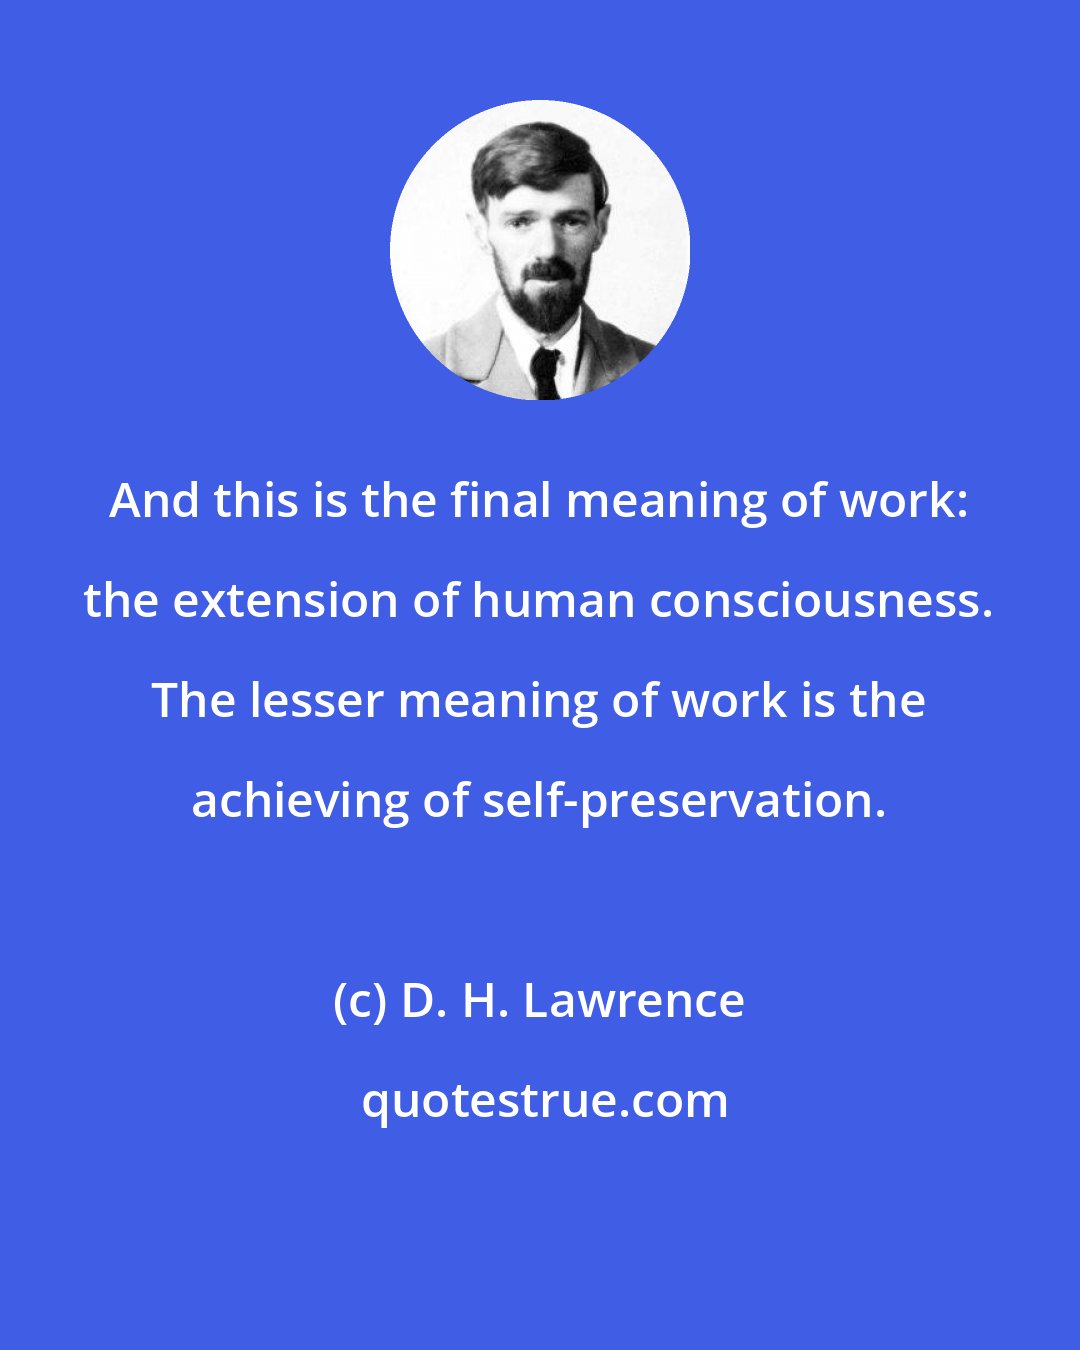 D. H. Lawrence: And this is the final meaning of work: the extension of human consciousness. The lesser meaning of work is the achieving of self-preservation.